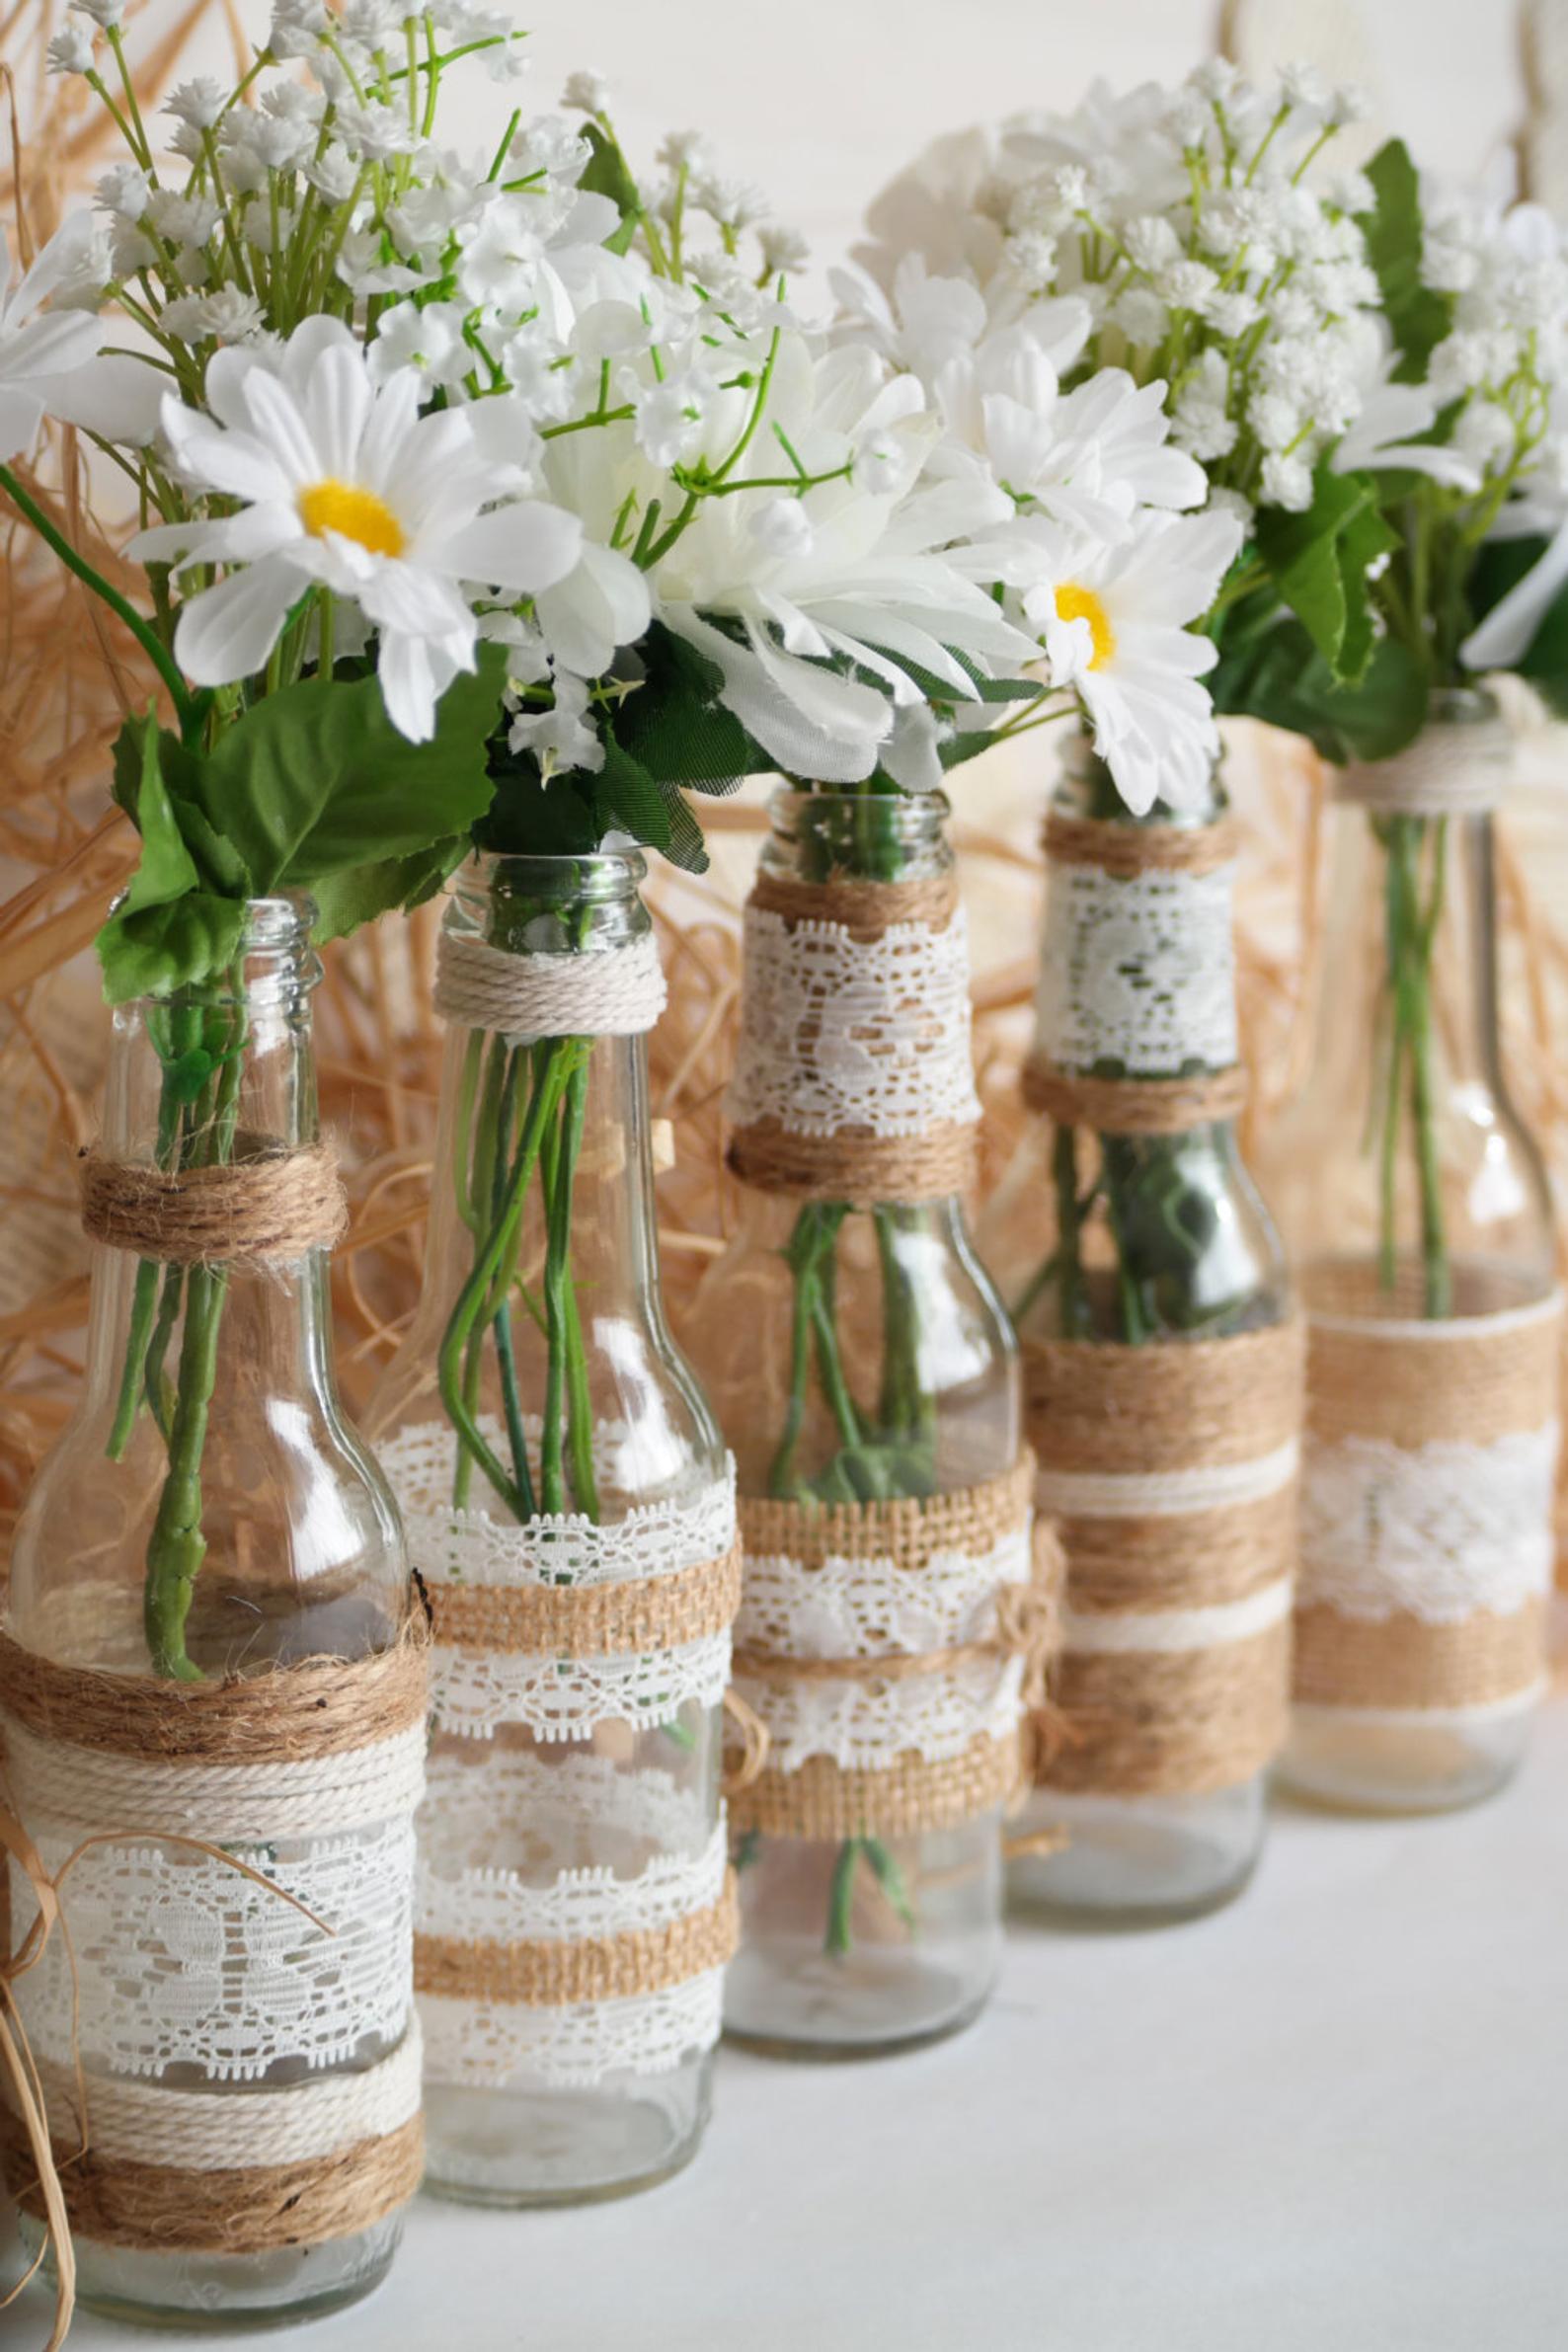 Shabby Chic Rustic Wedding Centrepieces 14 Jars ideal for flowers or Candles 